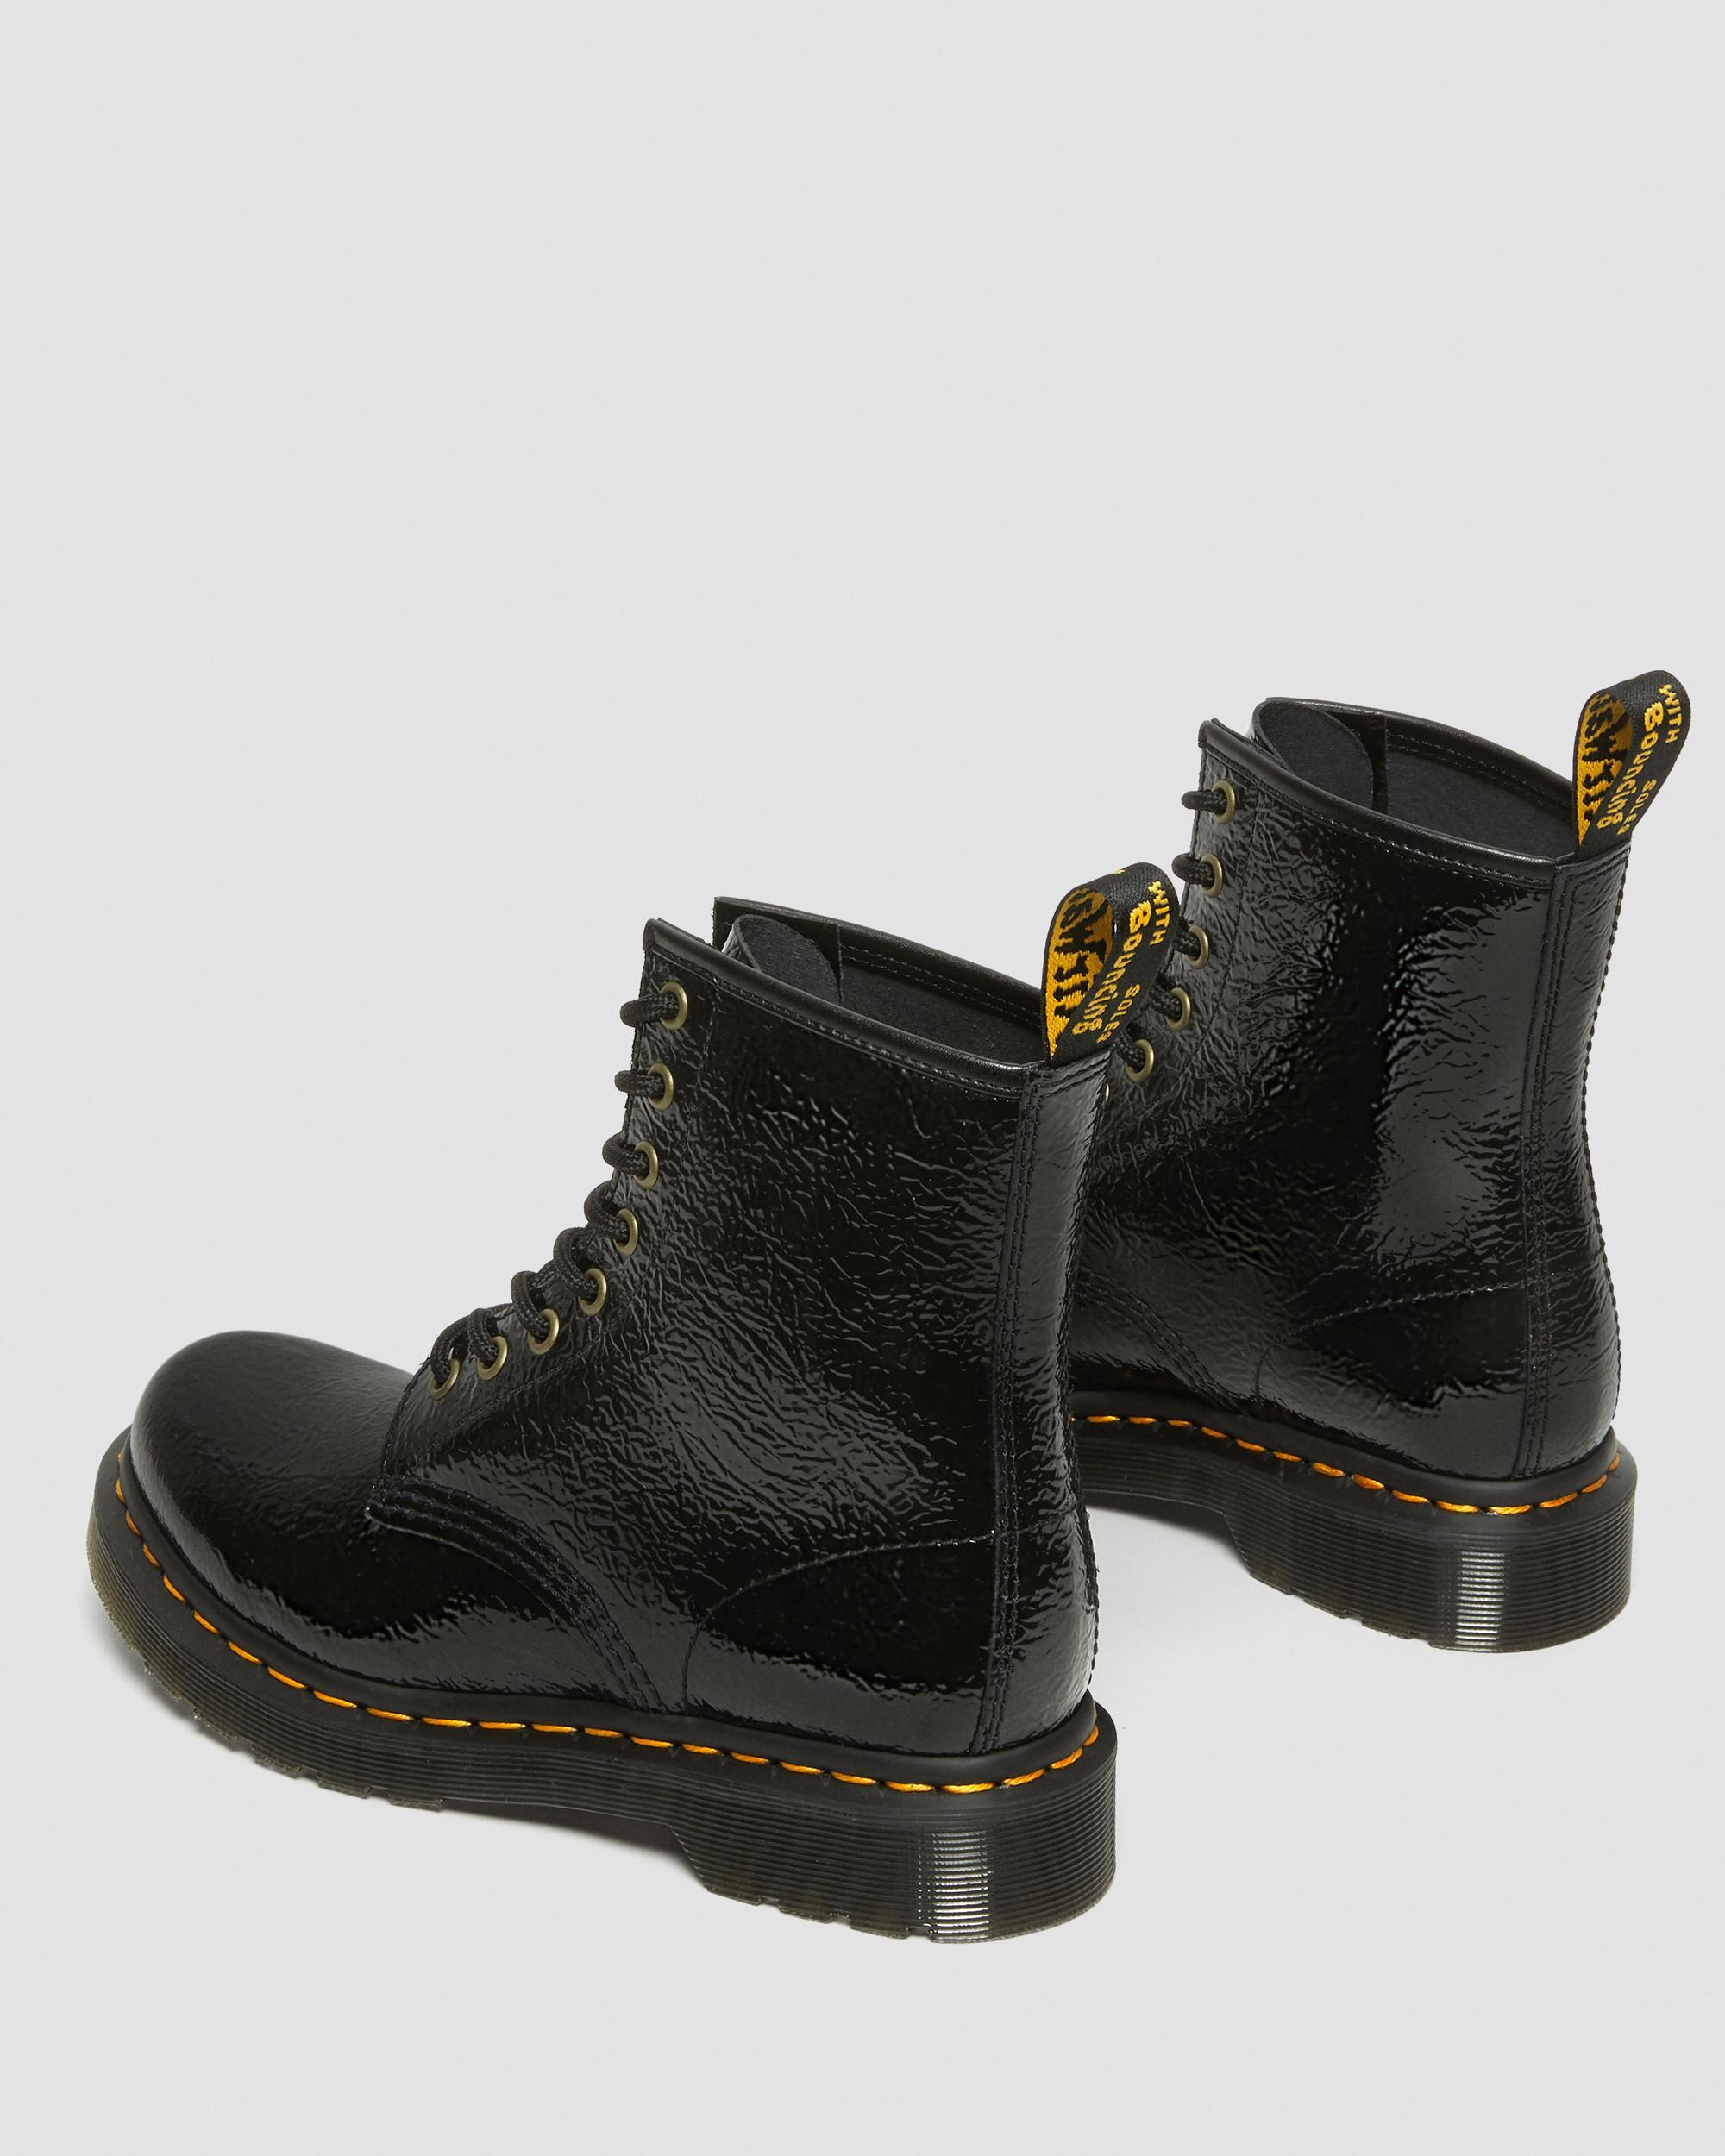 Dr. Martens 1460 Women's Distressed Patent Leather Boots in Black | Lyst